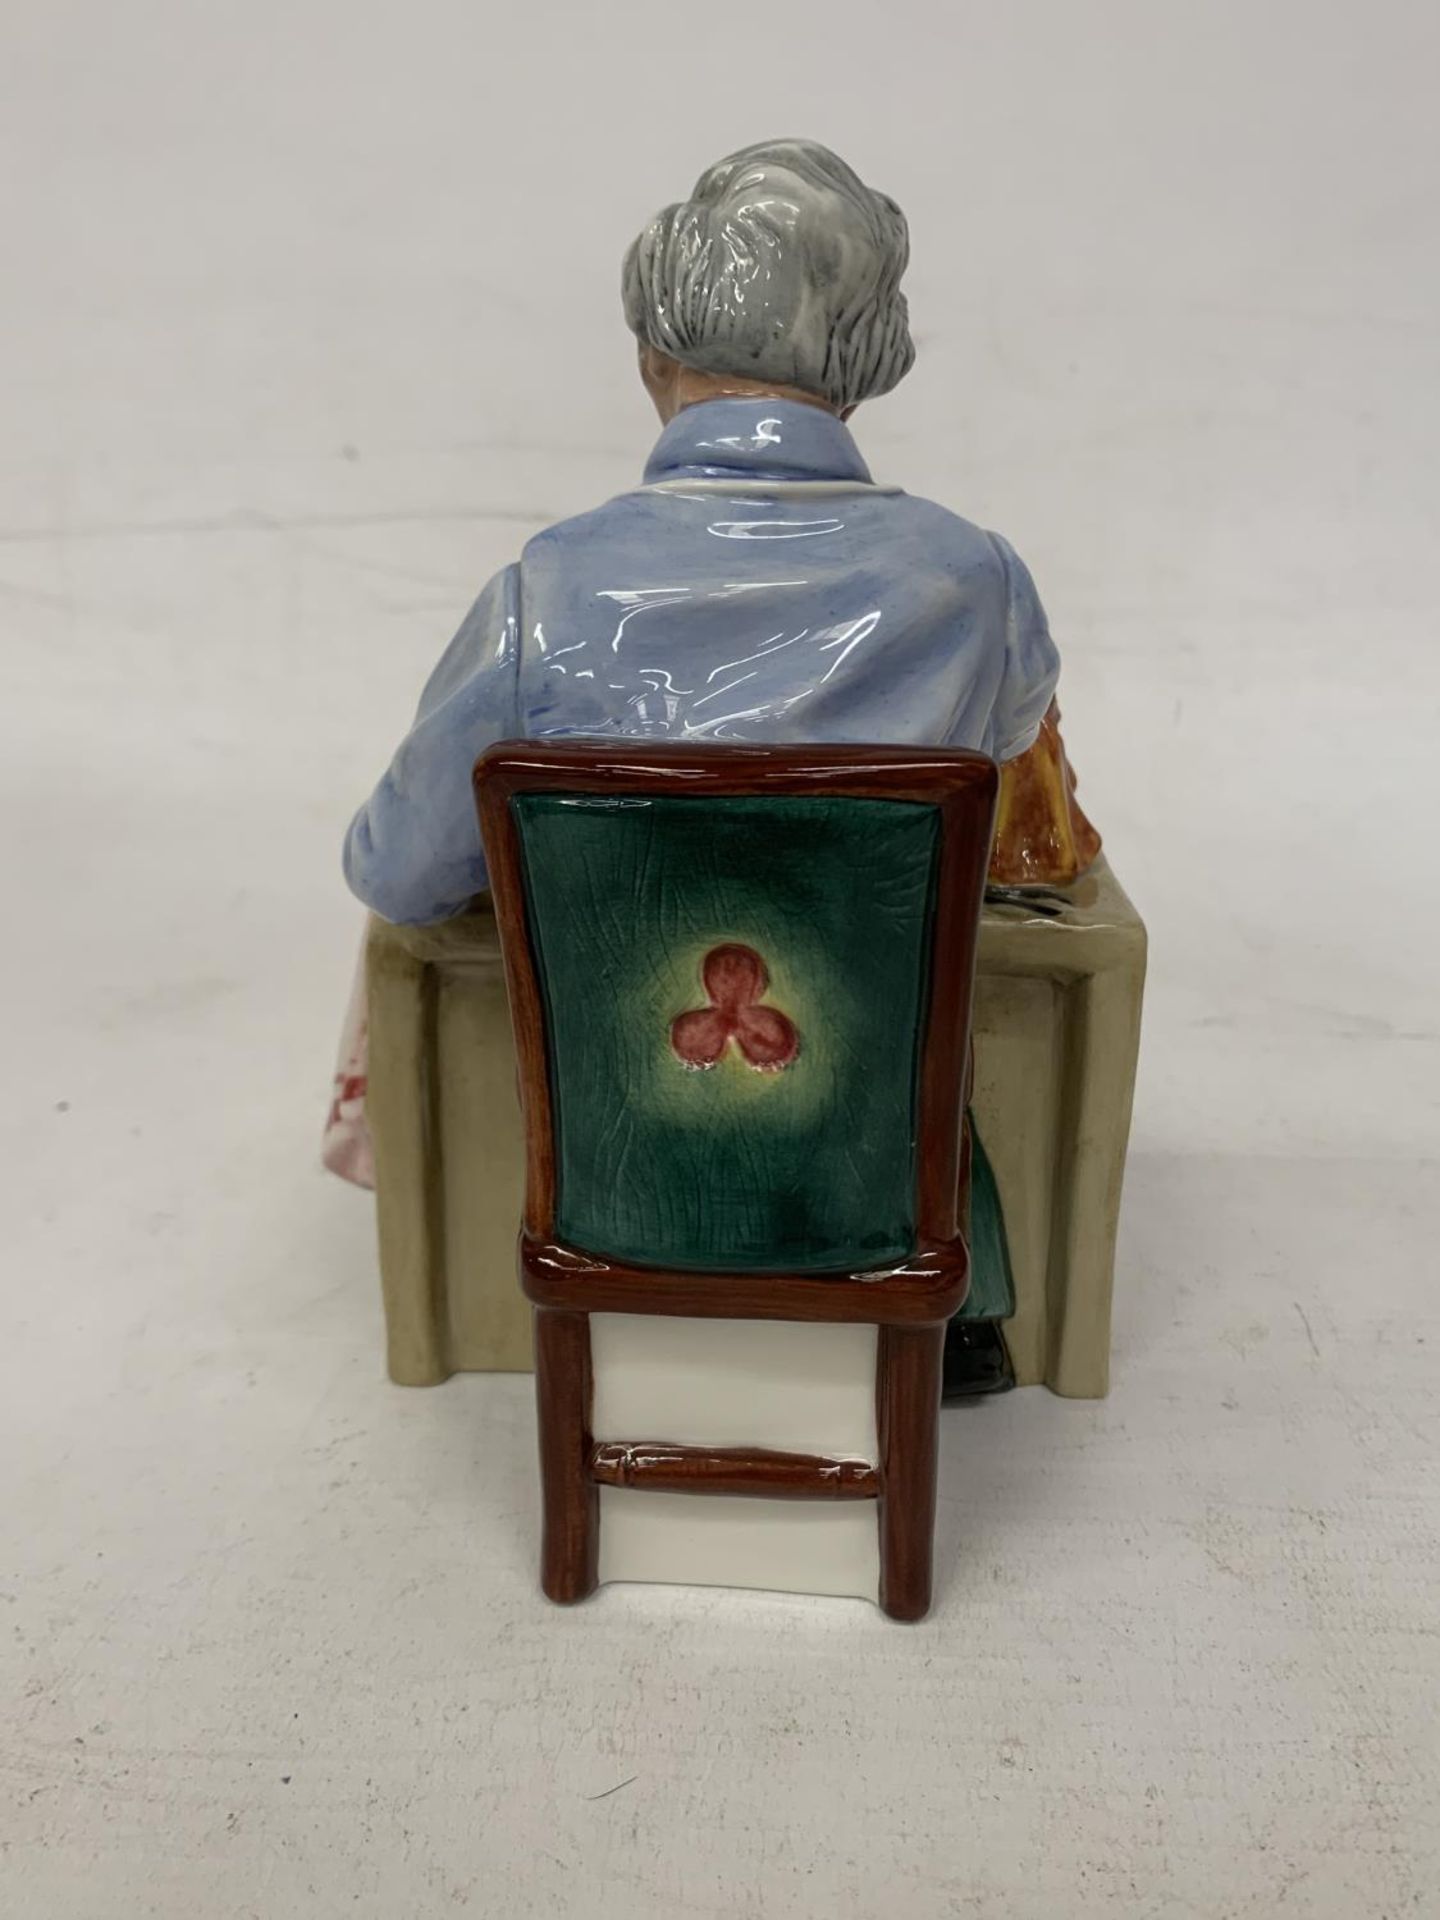 A ROYAL DOULTON FIGURE "THE CHINA REPAIRER" HN 2943 - Image 3 of 5